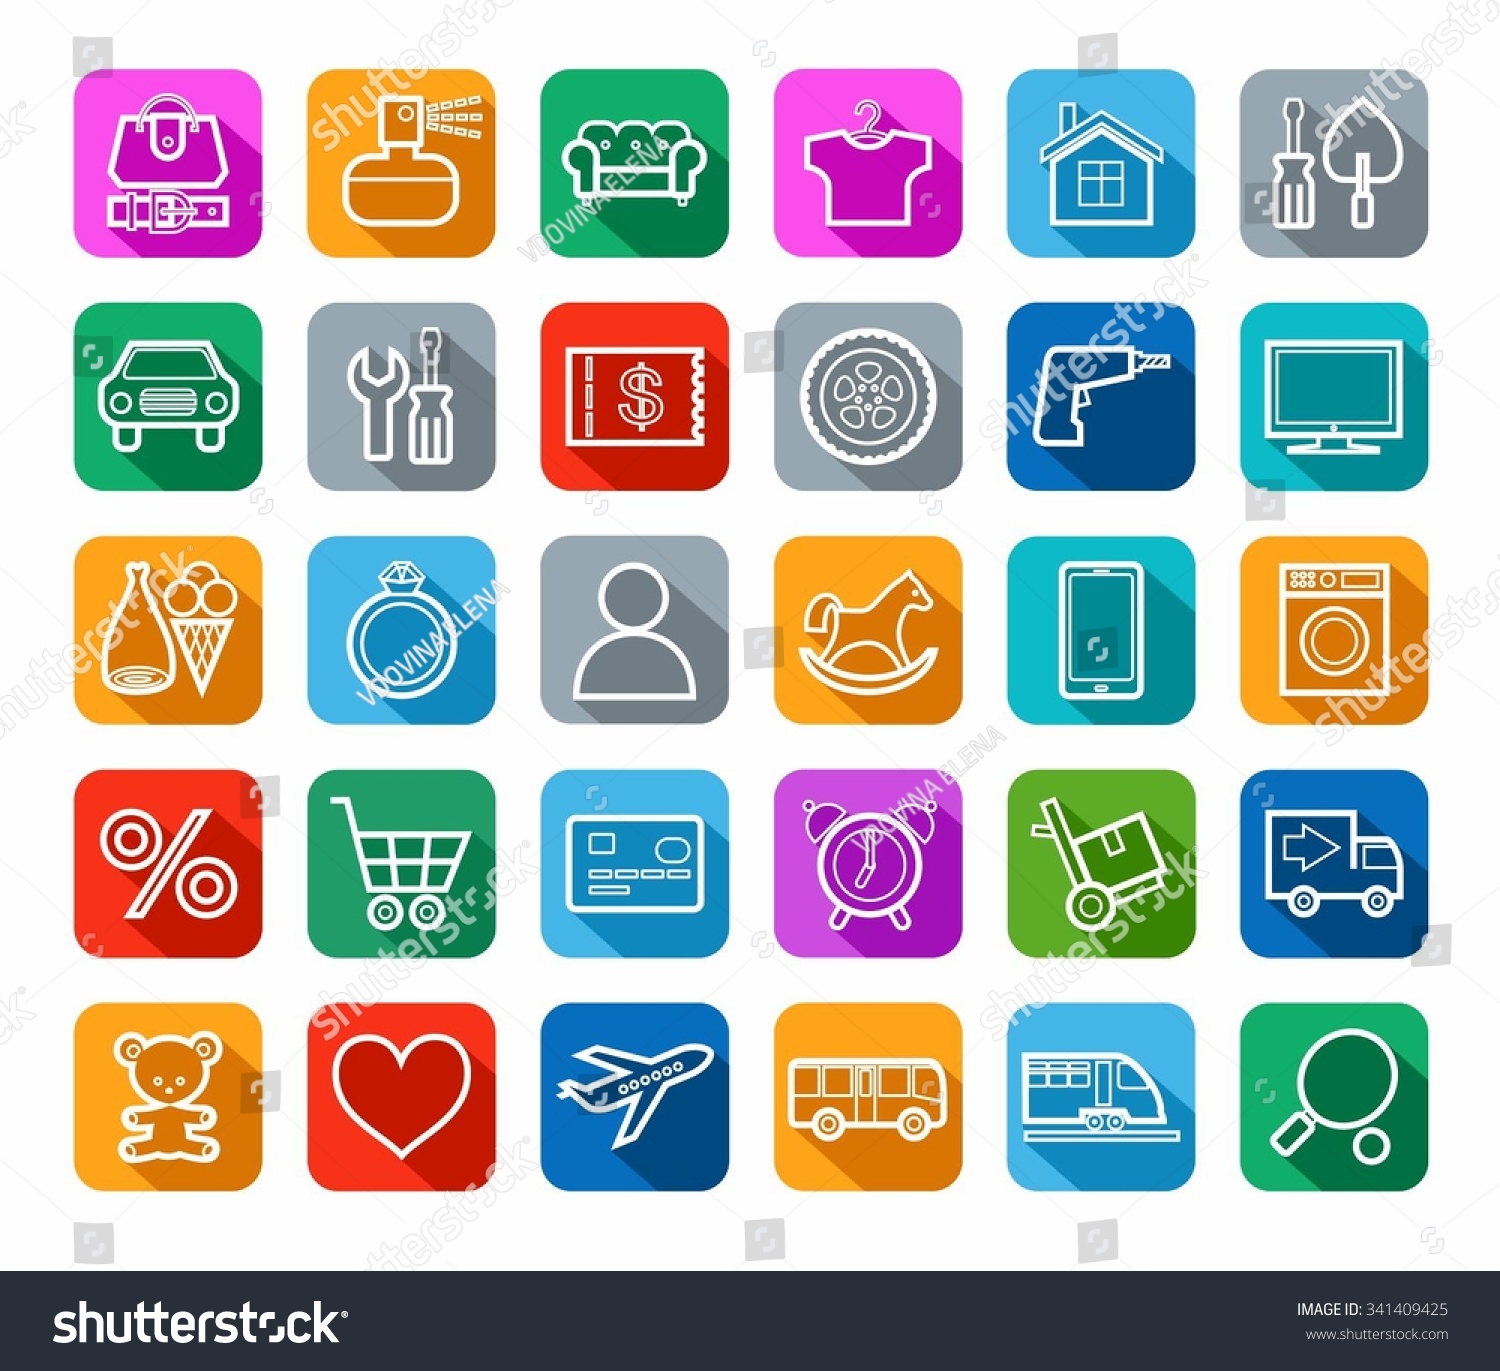 Categories Icon Vectors, Photos and PSD files | Free Download